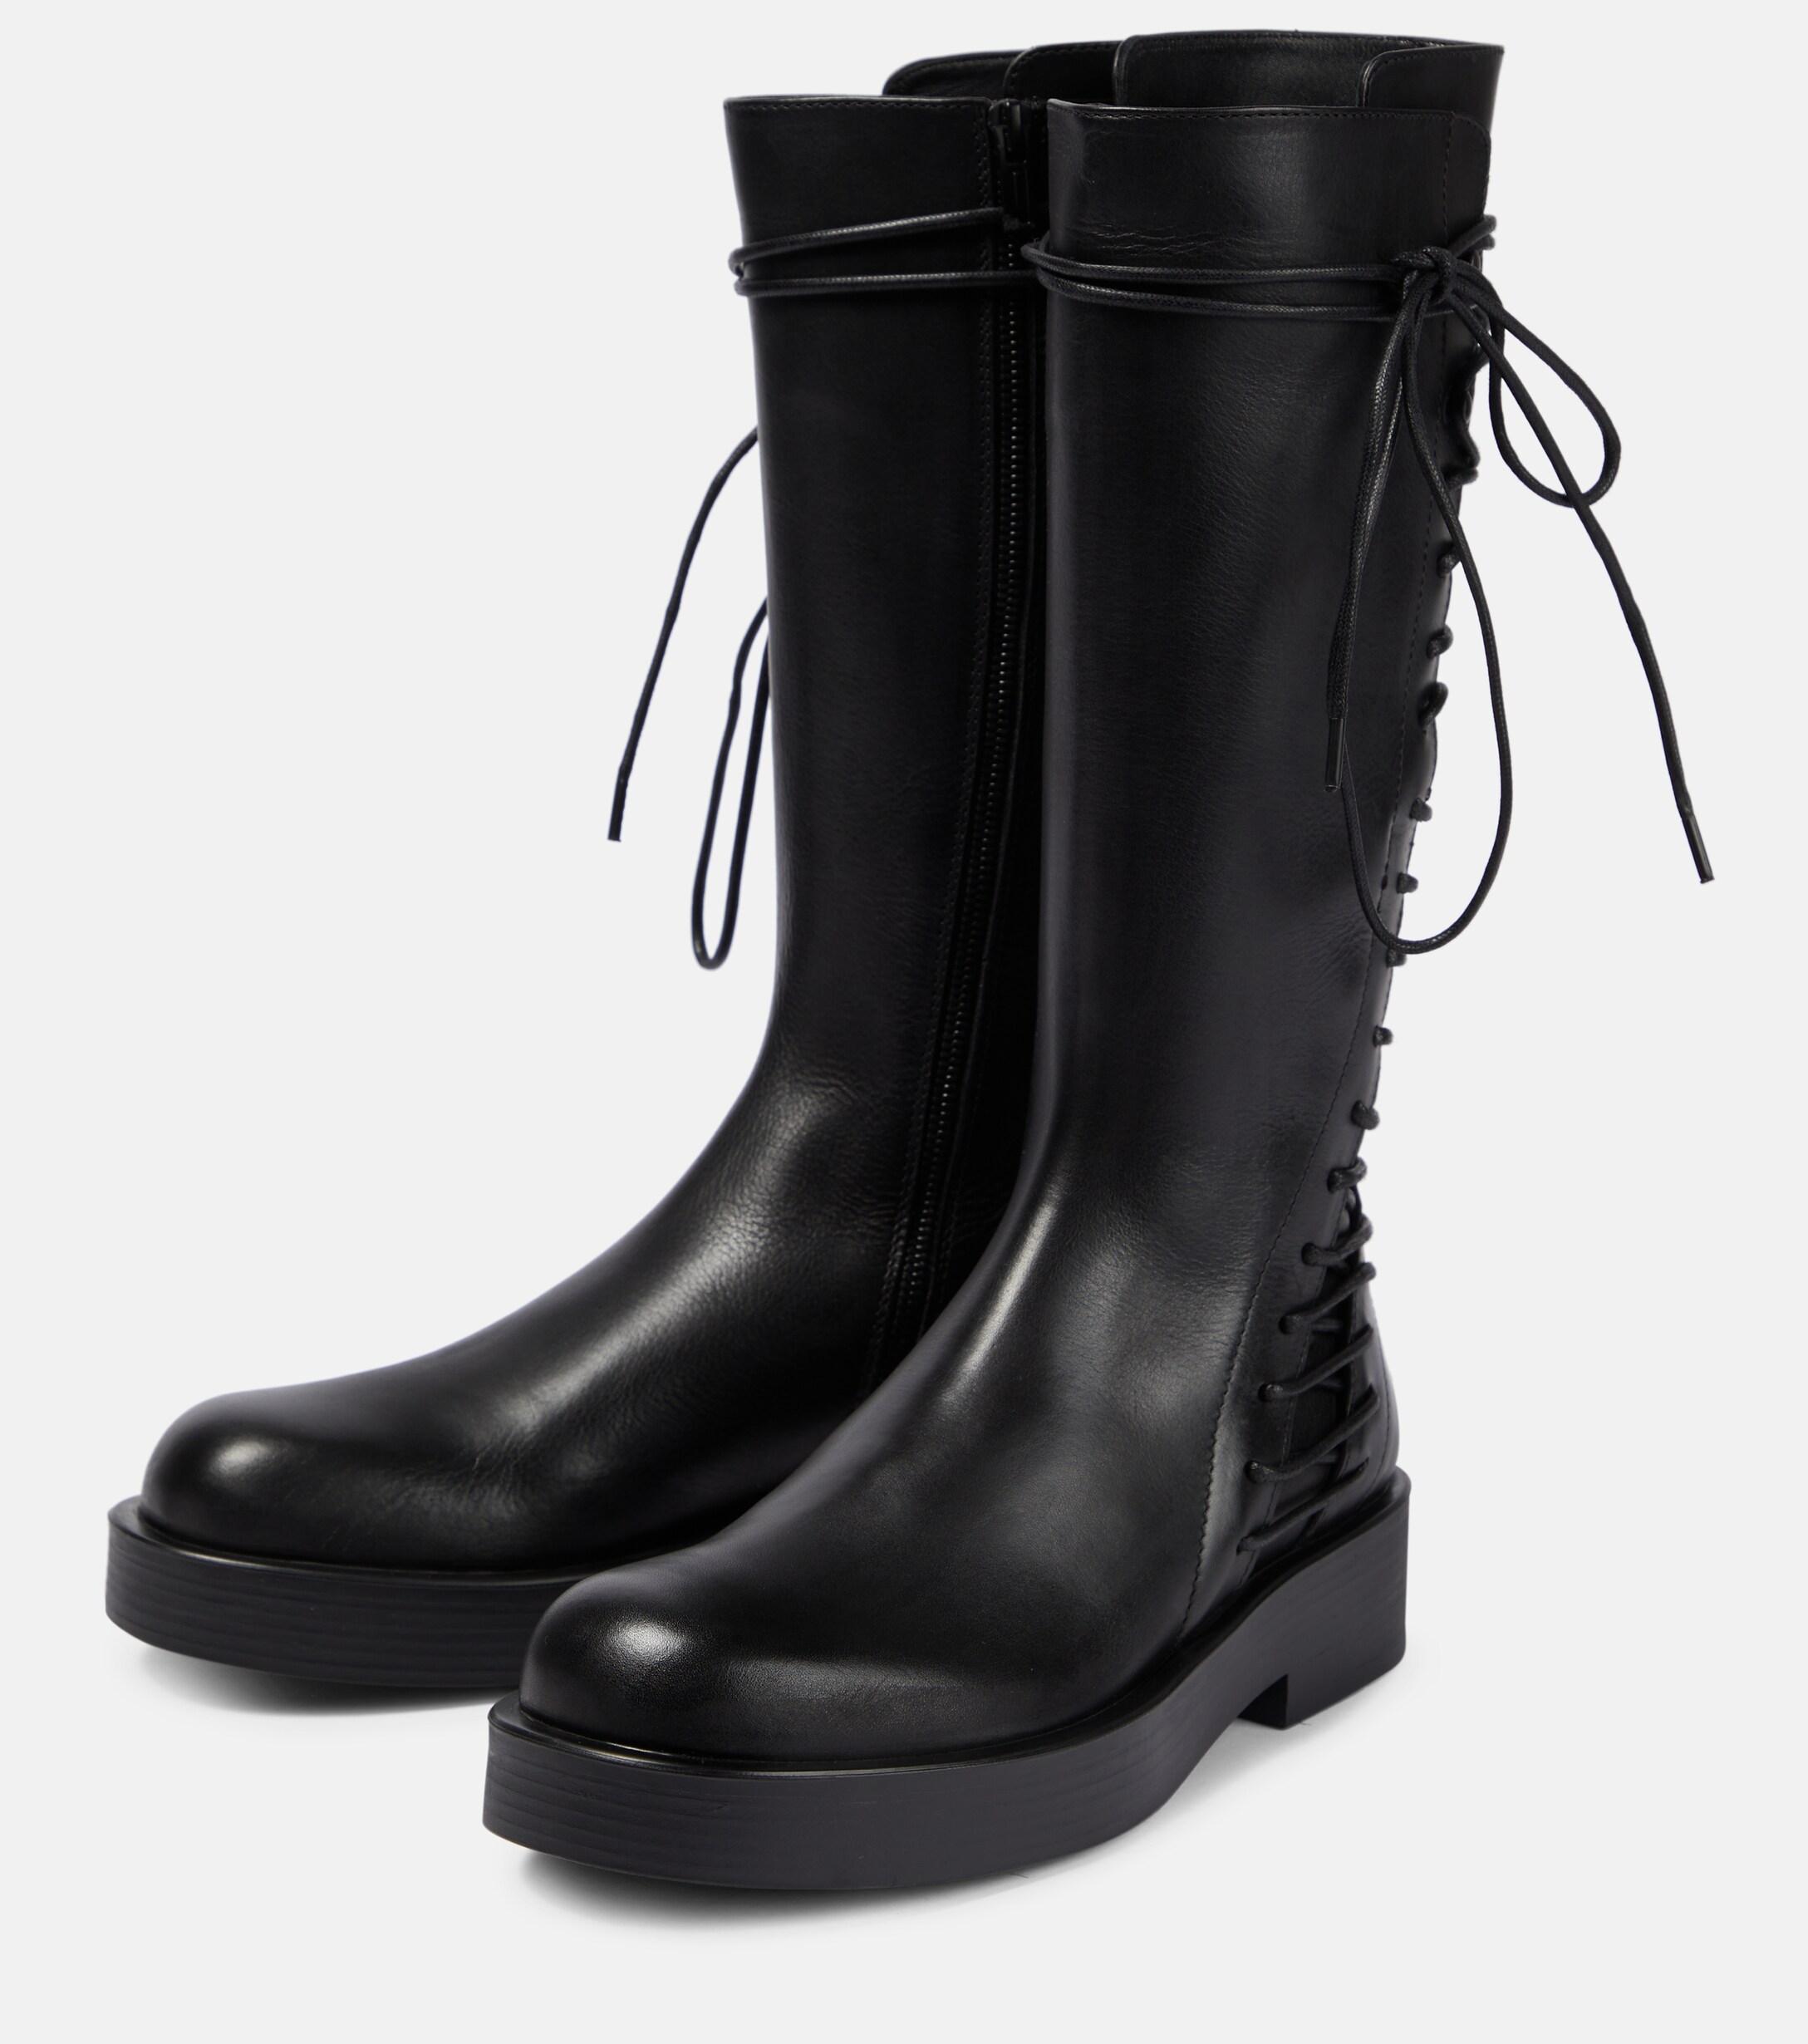 Ann Demeulemeester Women's Black Lace-up Leather Knee-high Boots